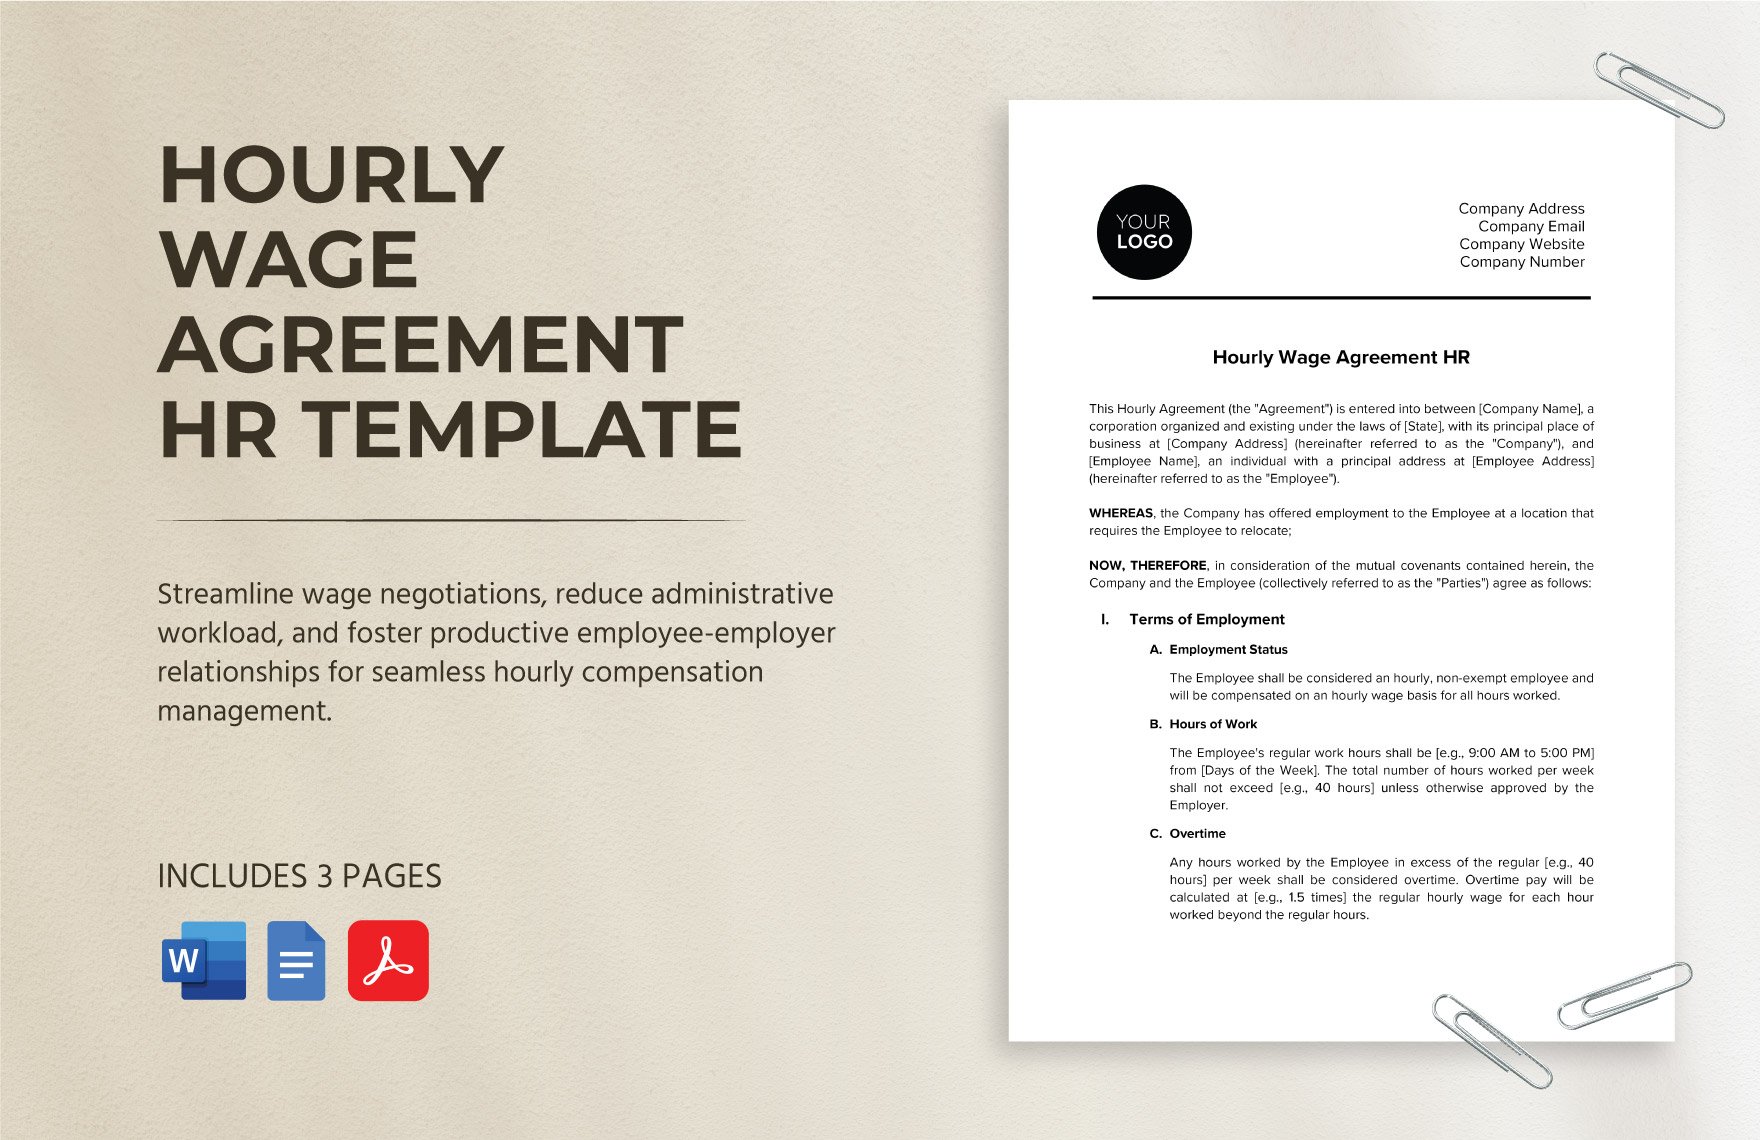 Hourly Wage Agreement HR Template in Word, Google Docs, PDF